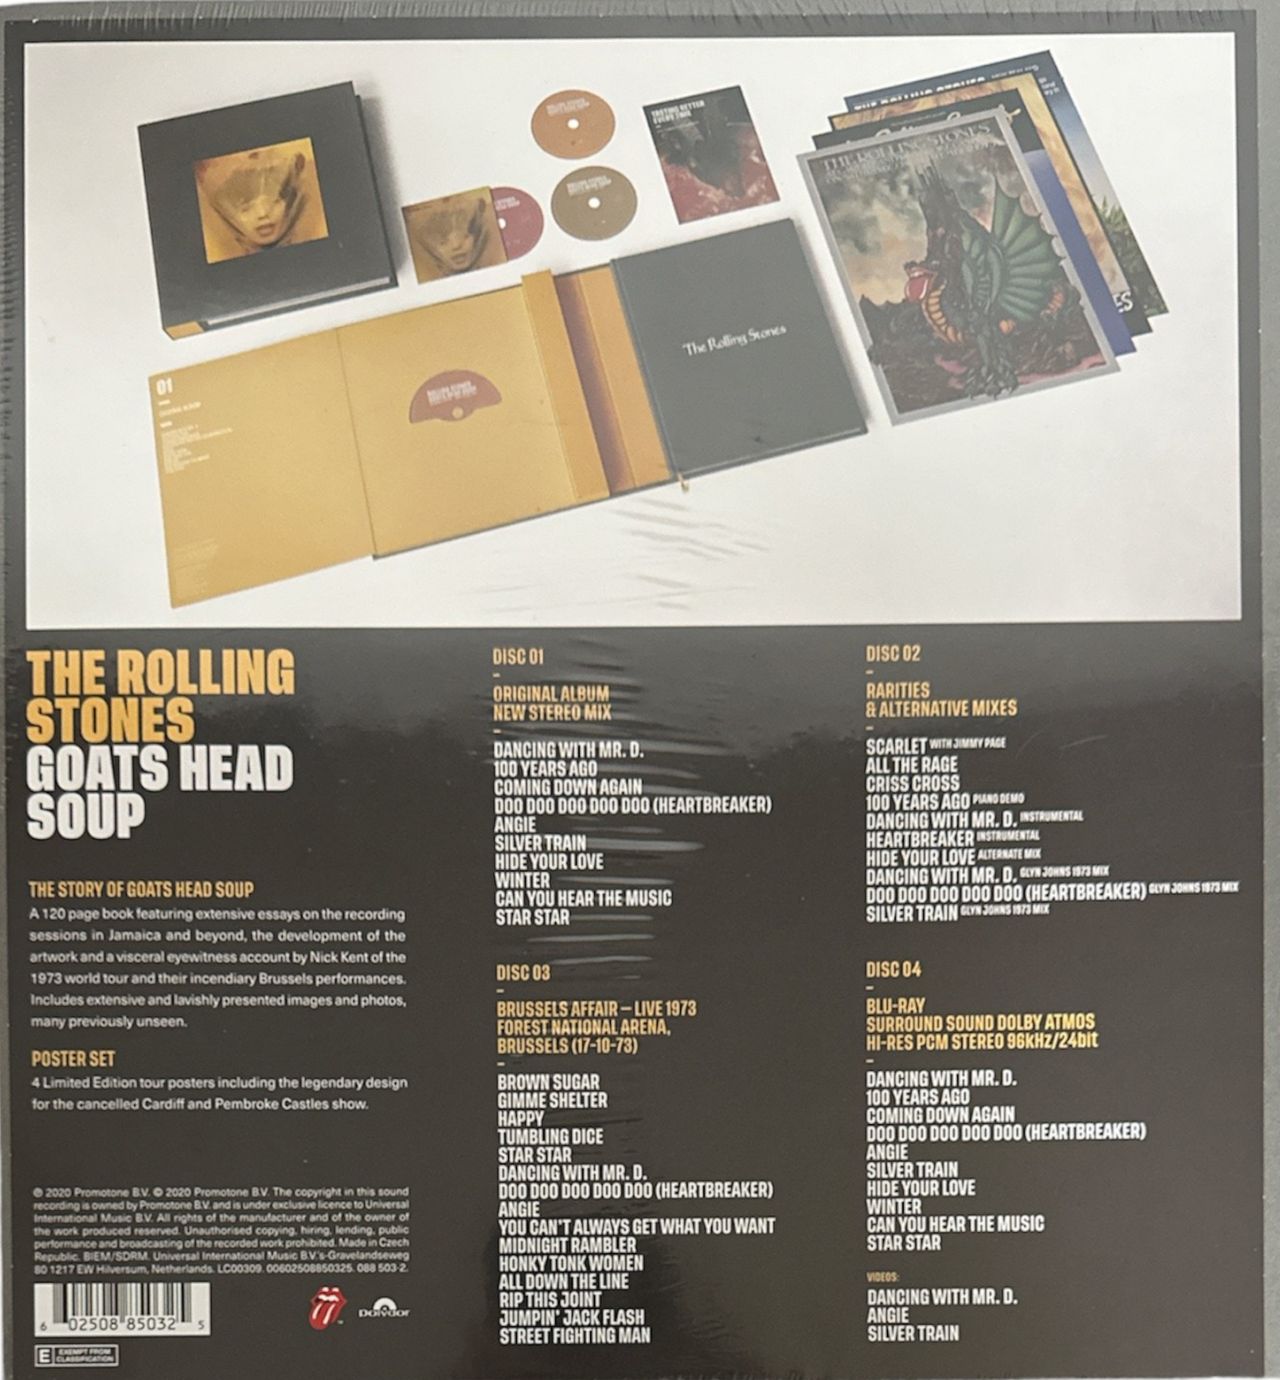 The Rolling Stones Goats Head Soup - Super Deluxe 3CD+Blu-Ray Box